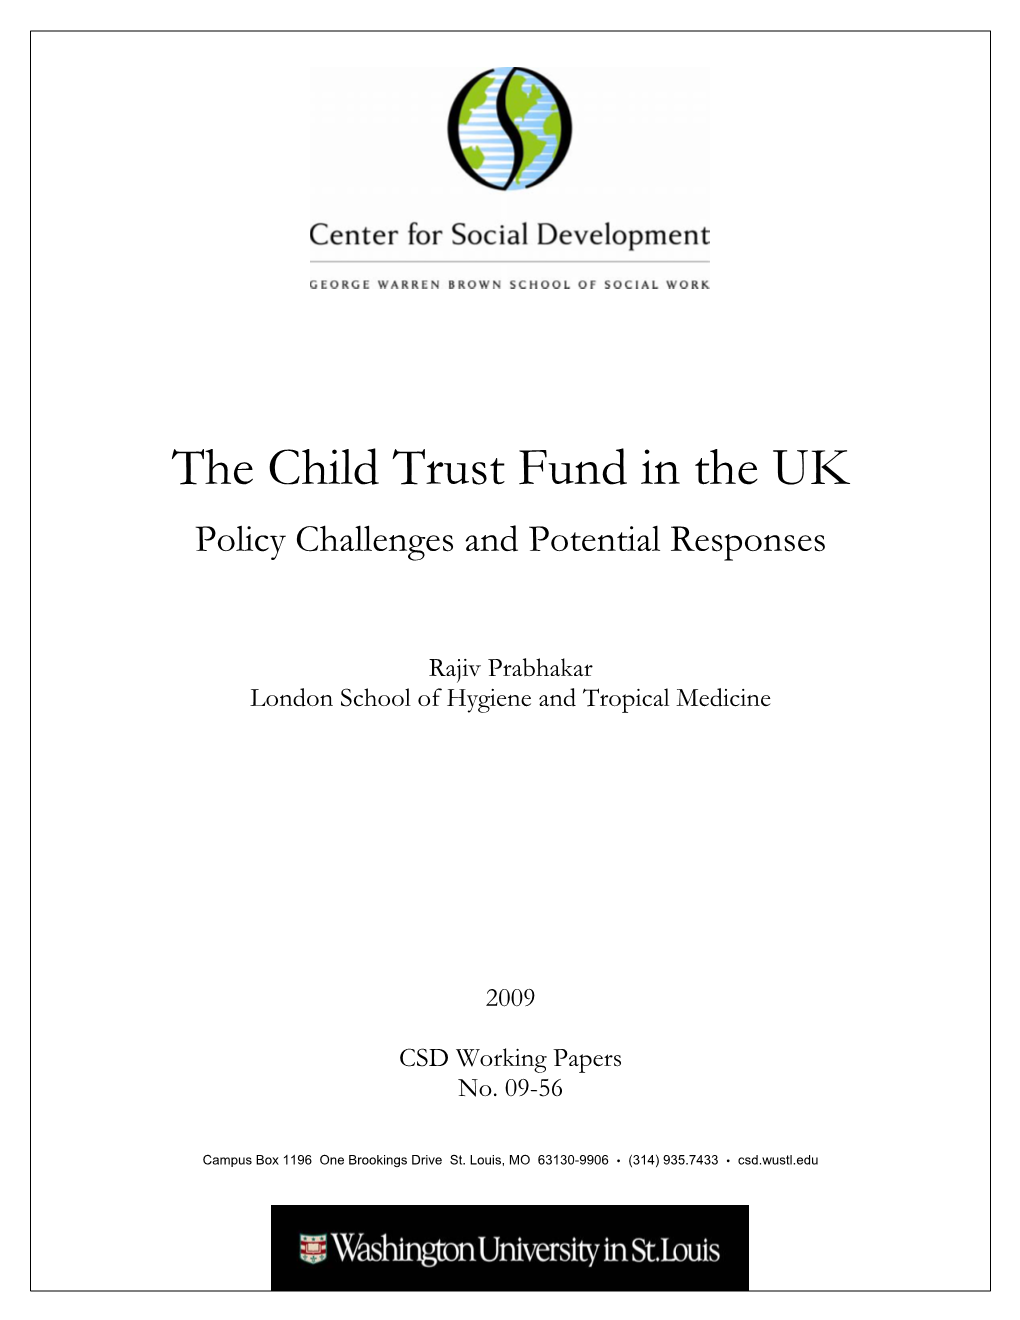 The Child Trust Fund in the UK Policy Challenges and Potential Responses